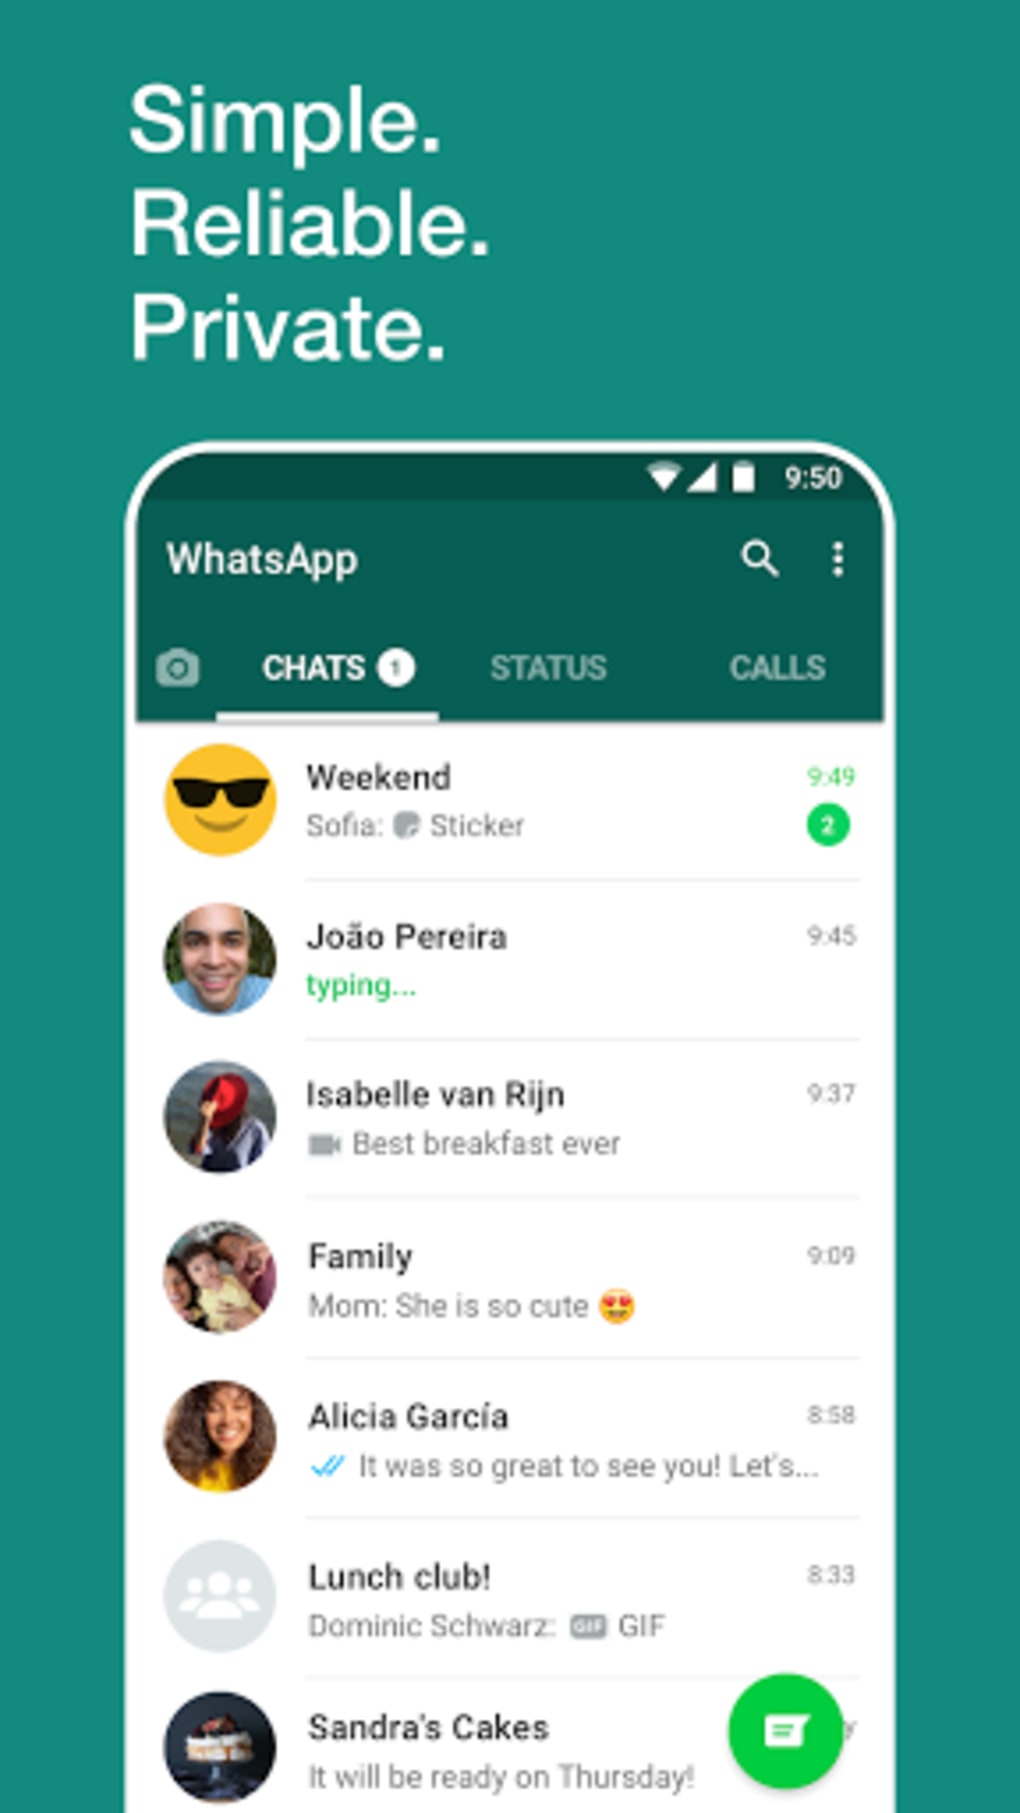 downloading whatsapp messenger for android